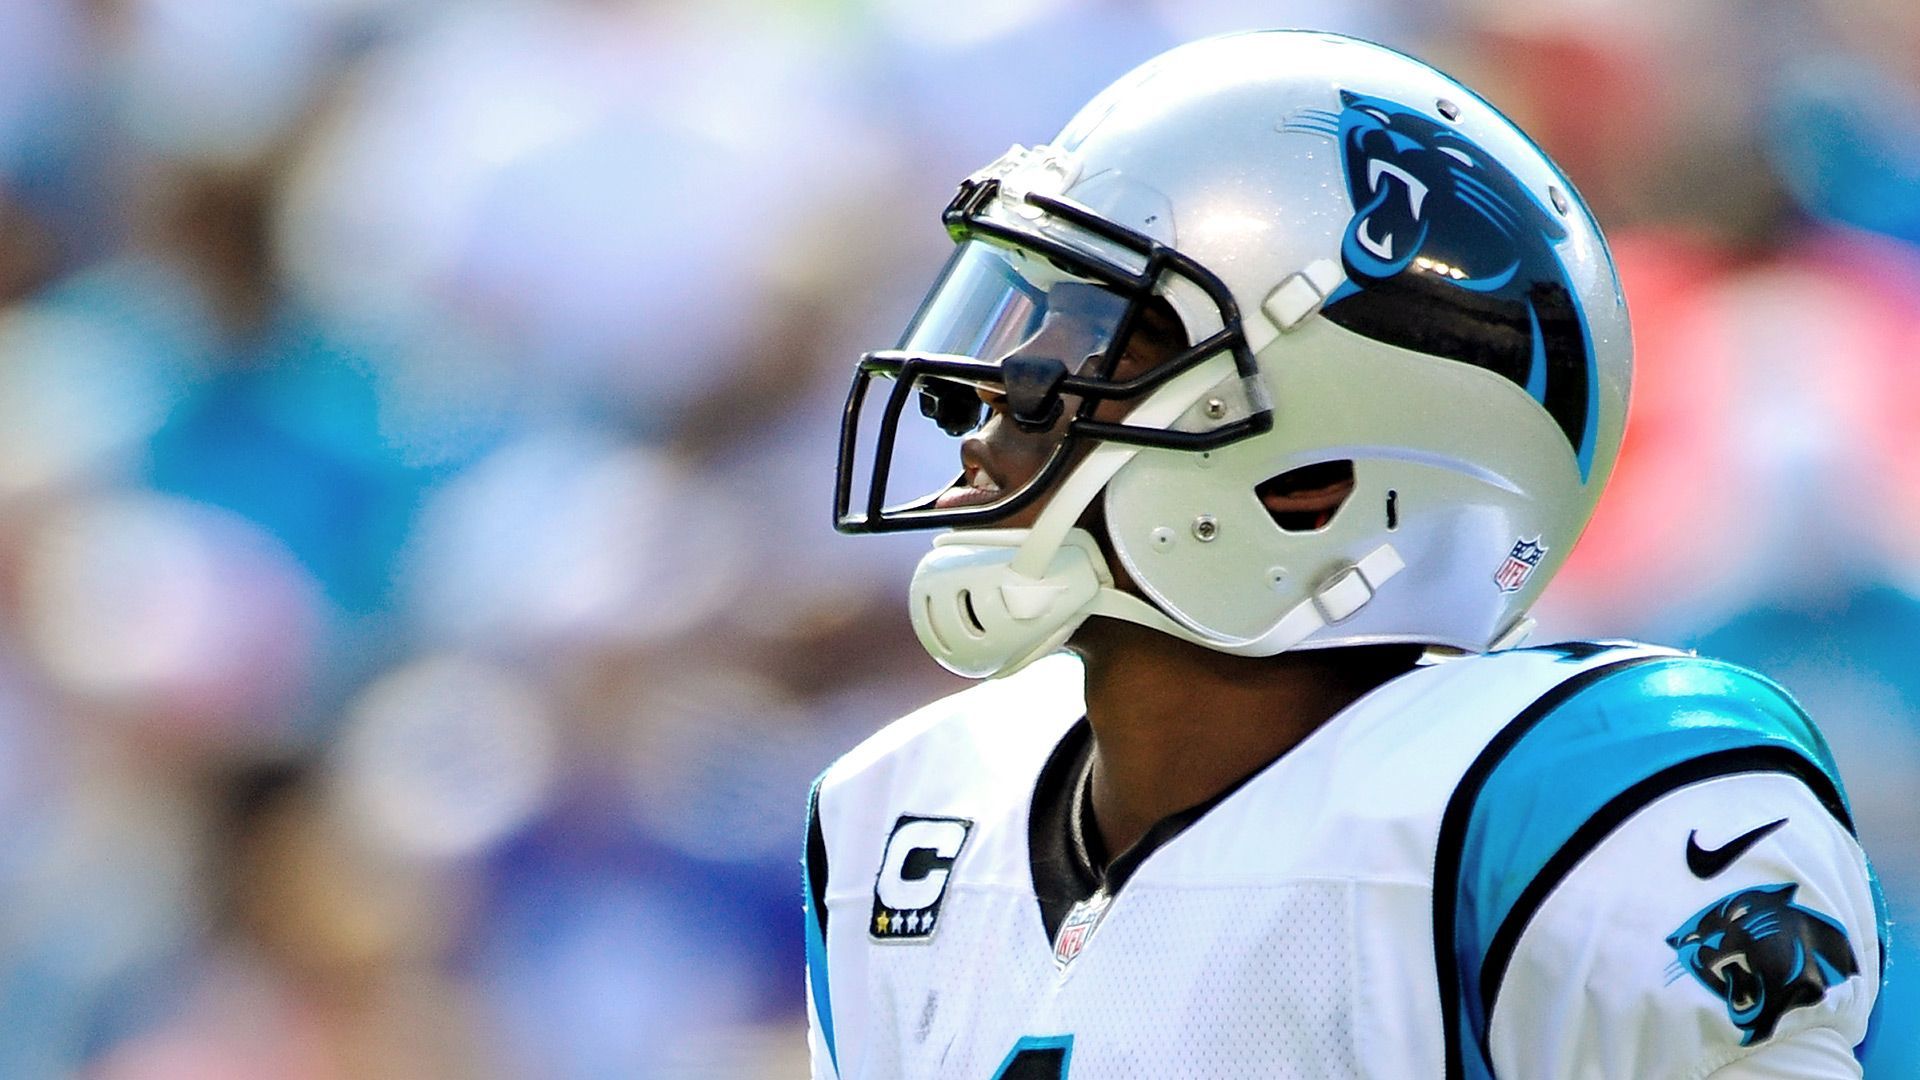 Cam Newton of Carolina Panthers fined $10K for equipment violation